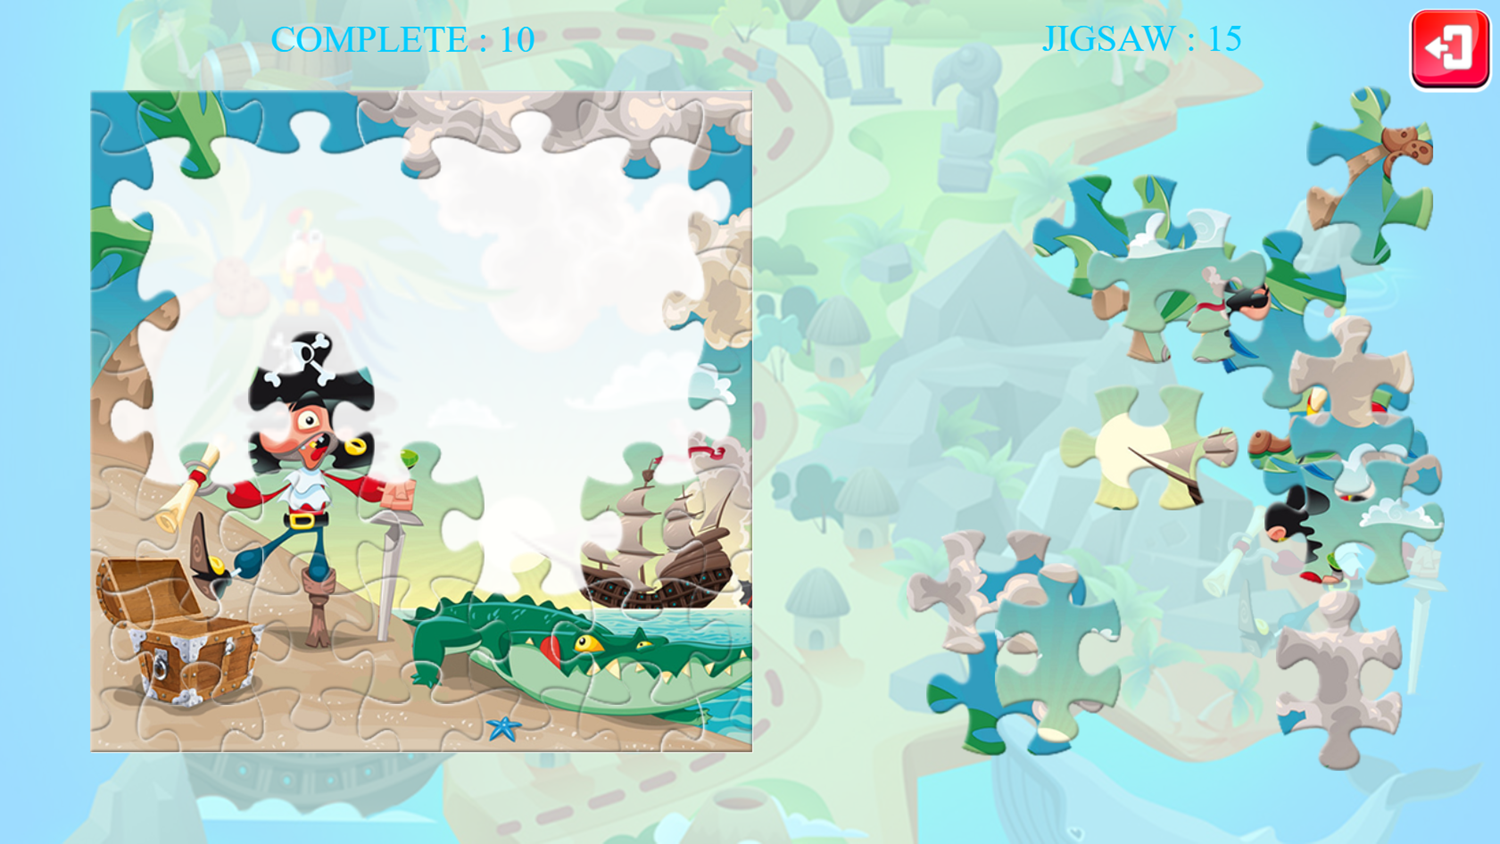 Find the Treasure Jigsaw Puzzle Game Play Screenshot.